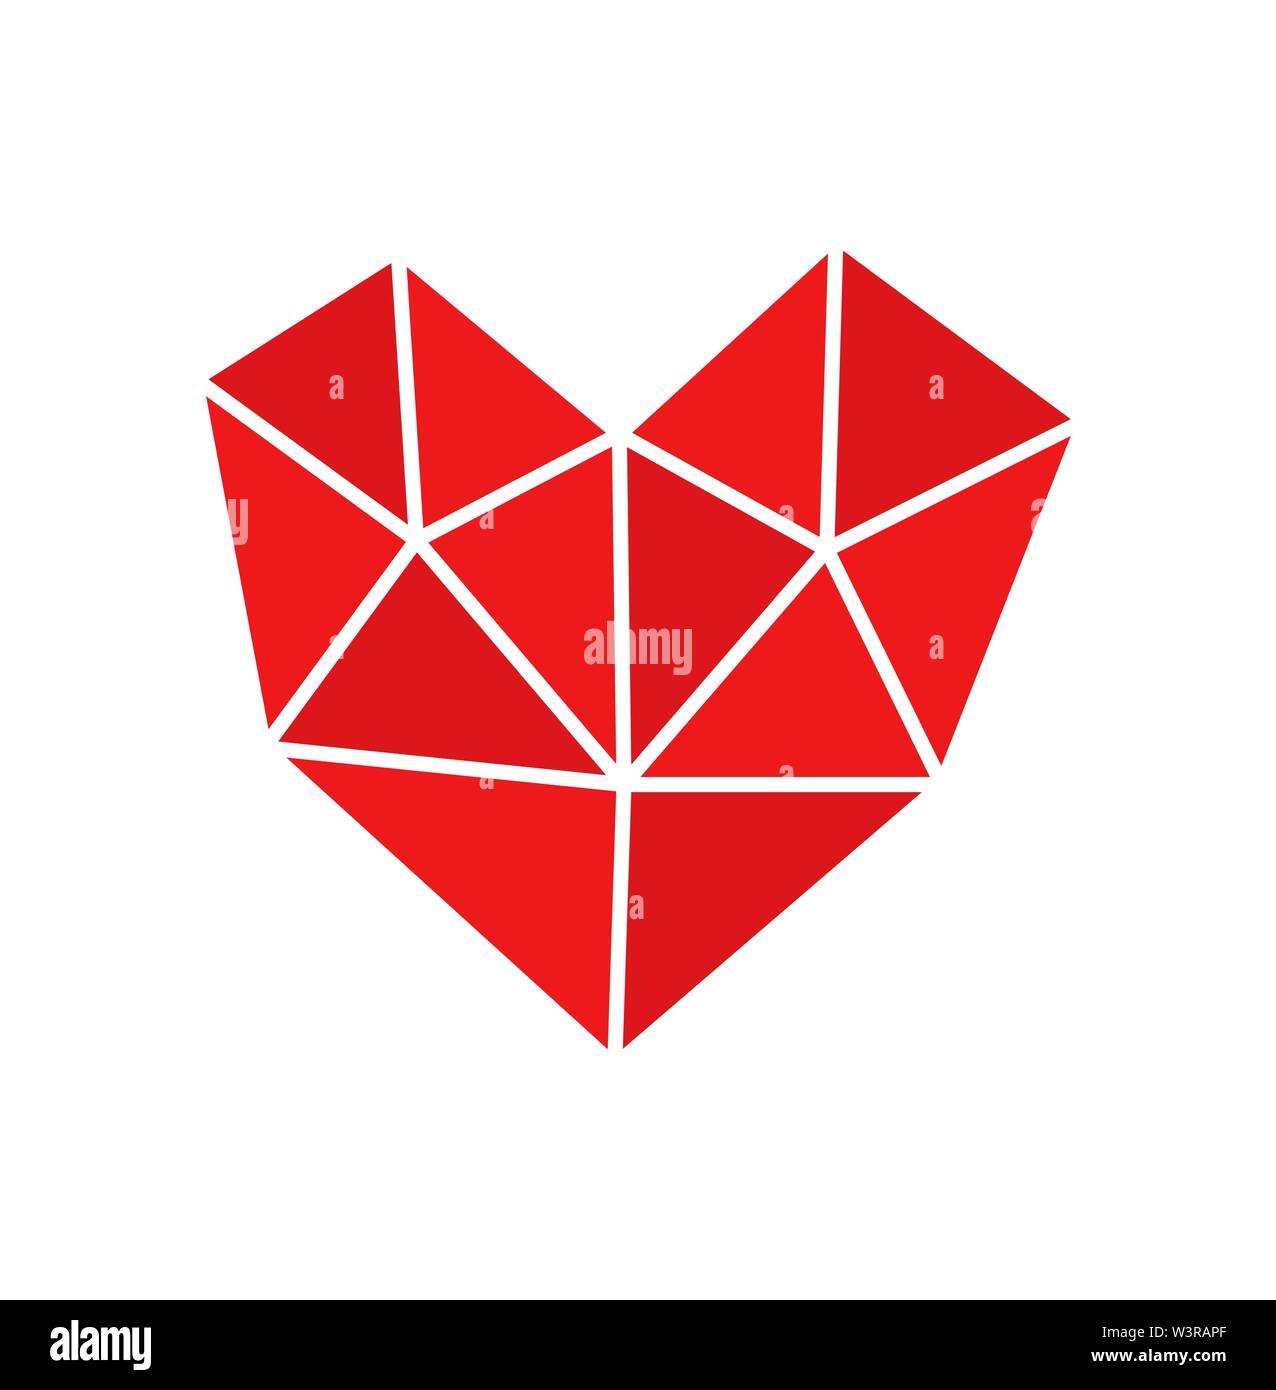 Heart shape made of triangles icon. Vector illustration. Stock Vector